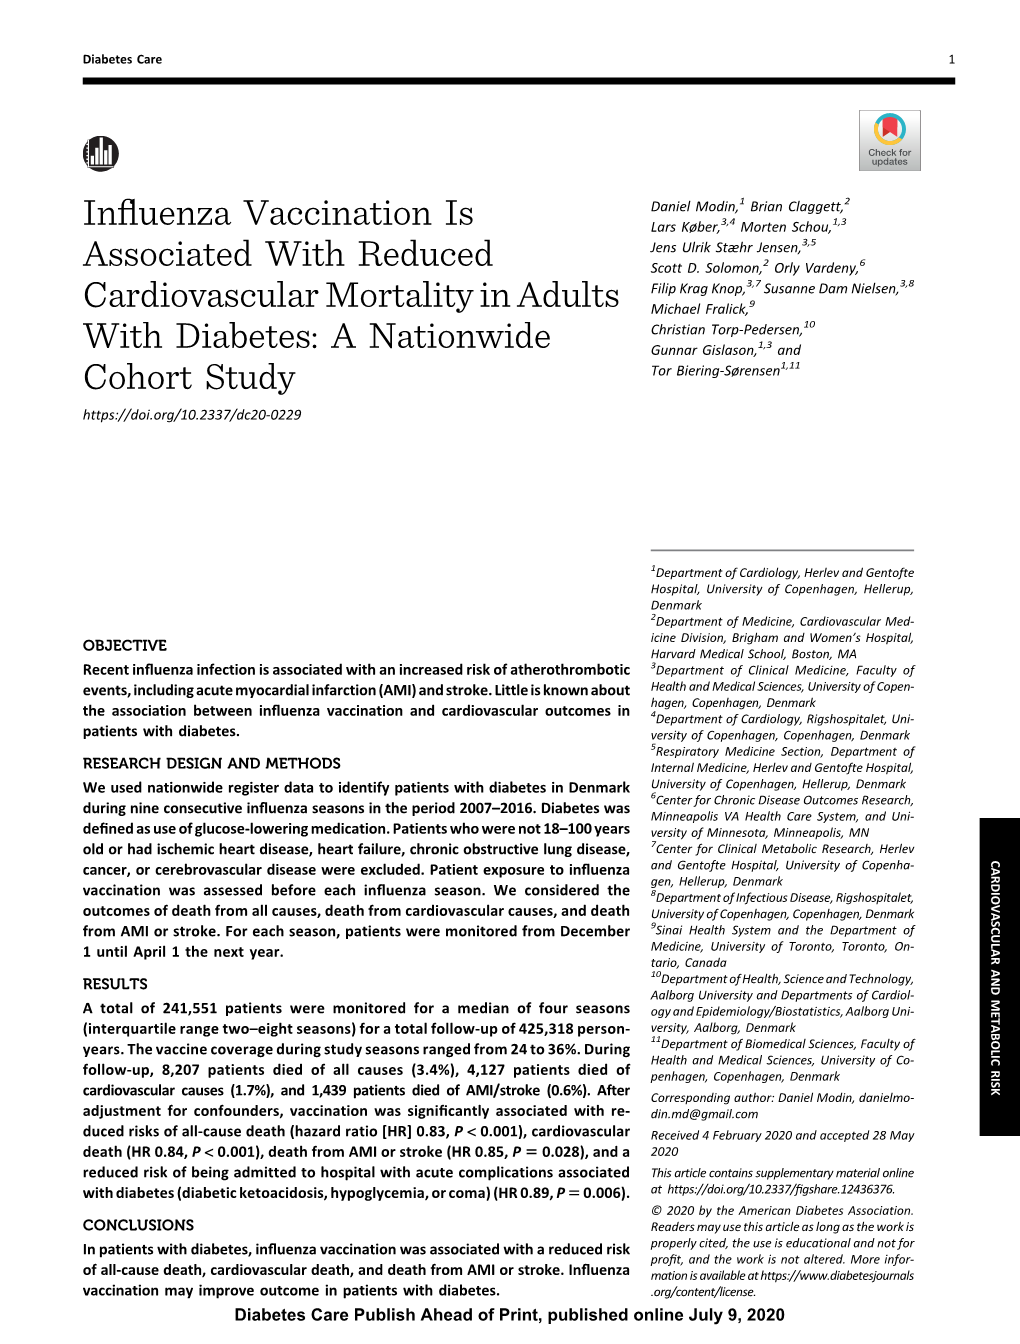 Influenza Vaccination Is Associated with Reduced